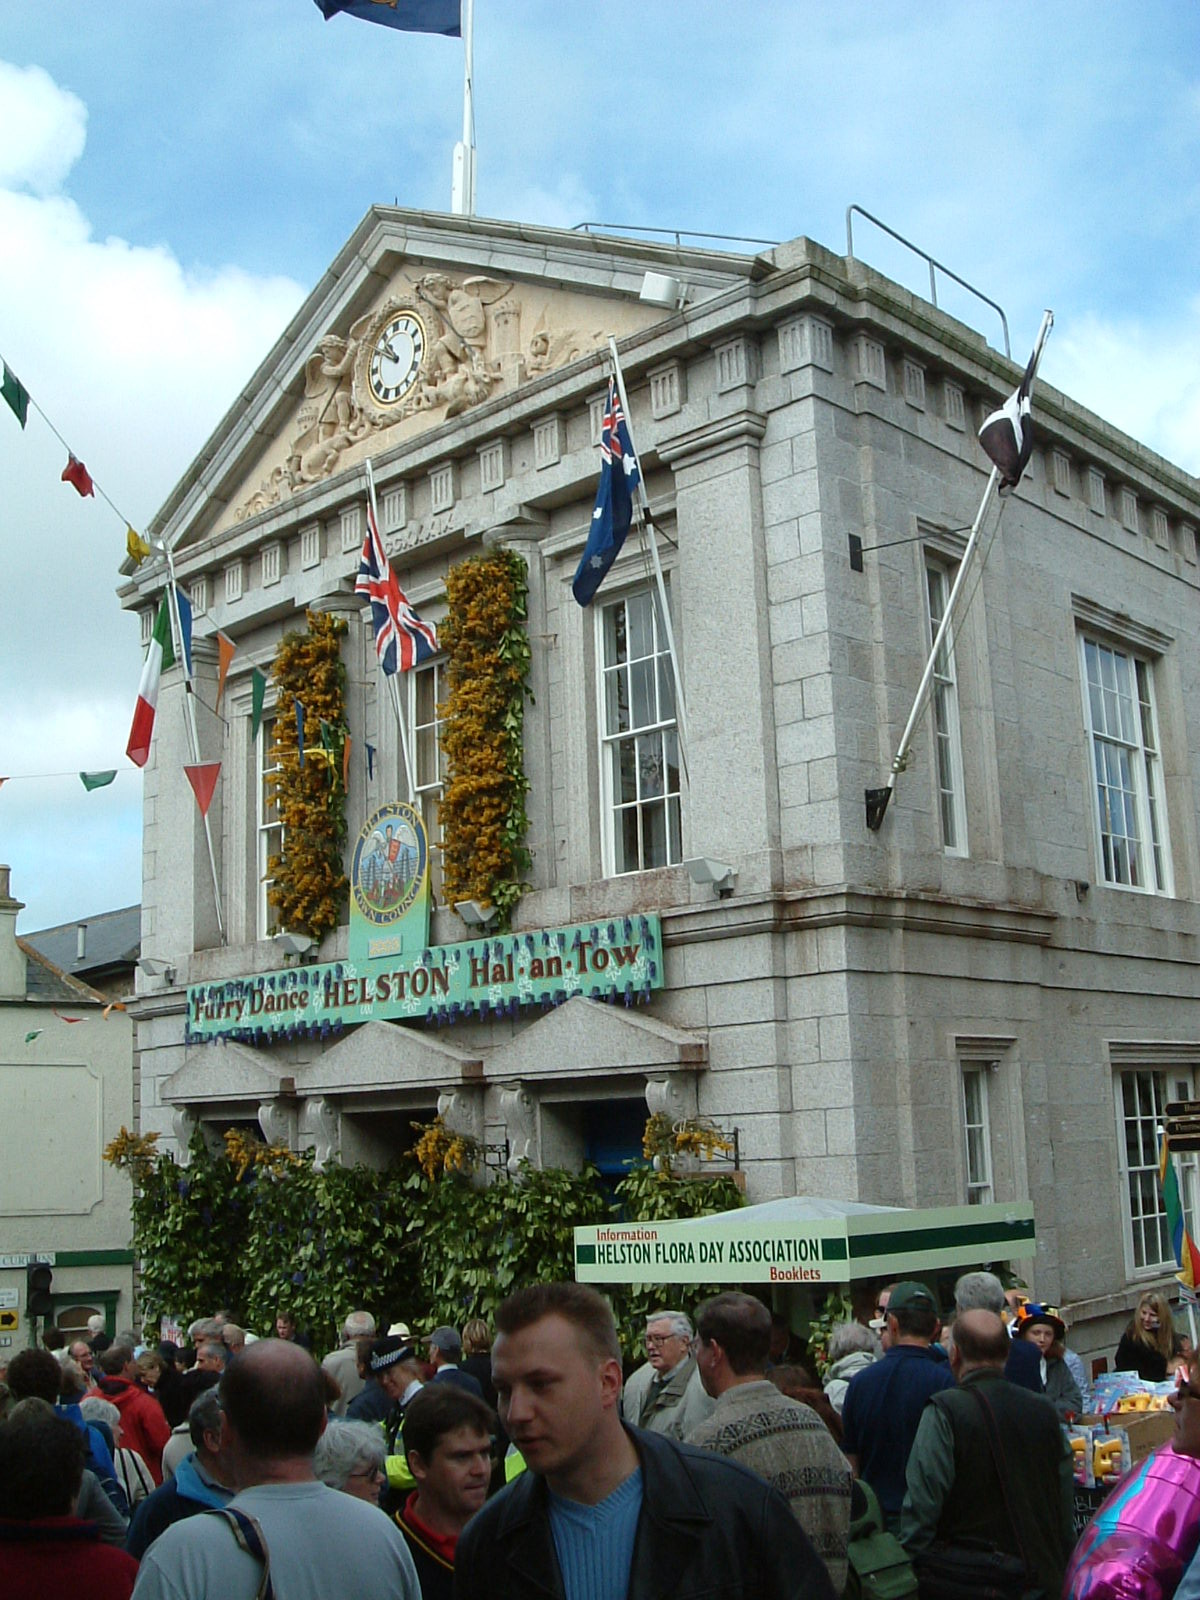 The Guildhall in Helston